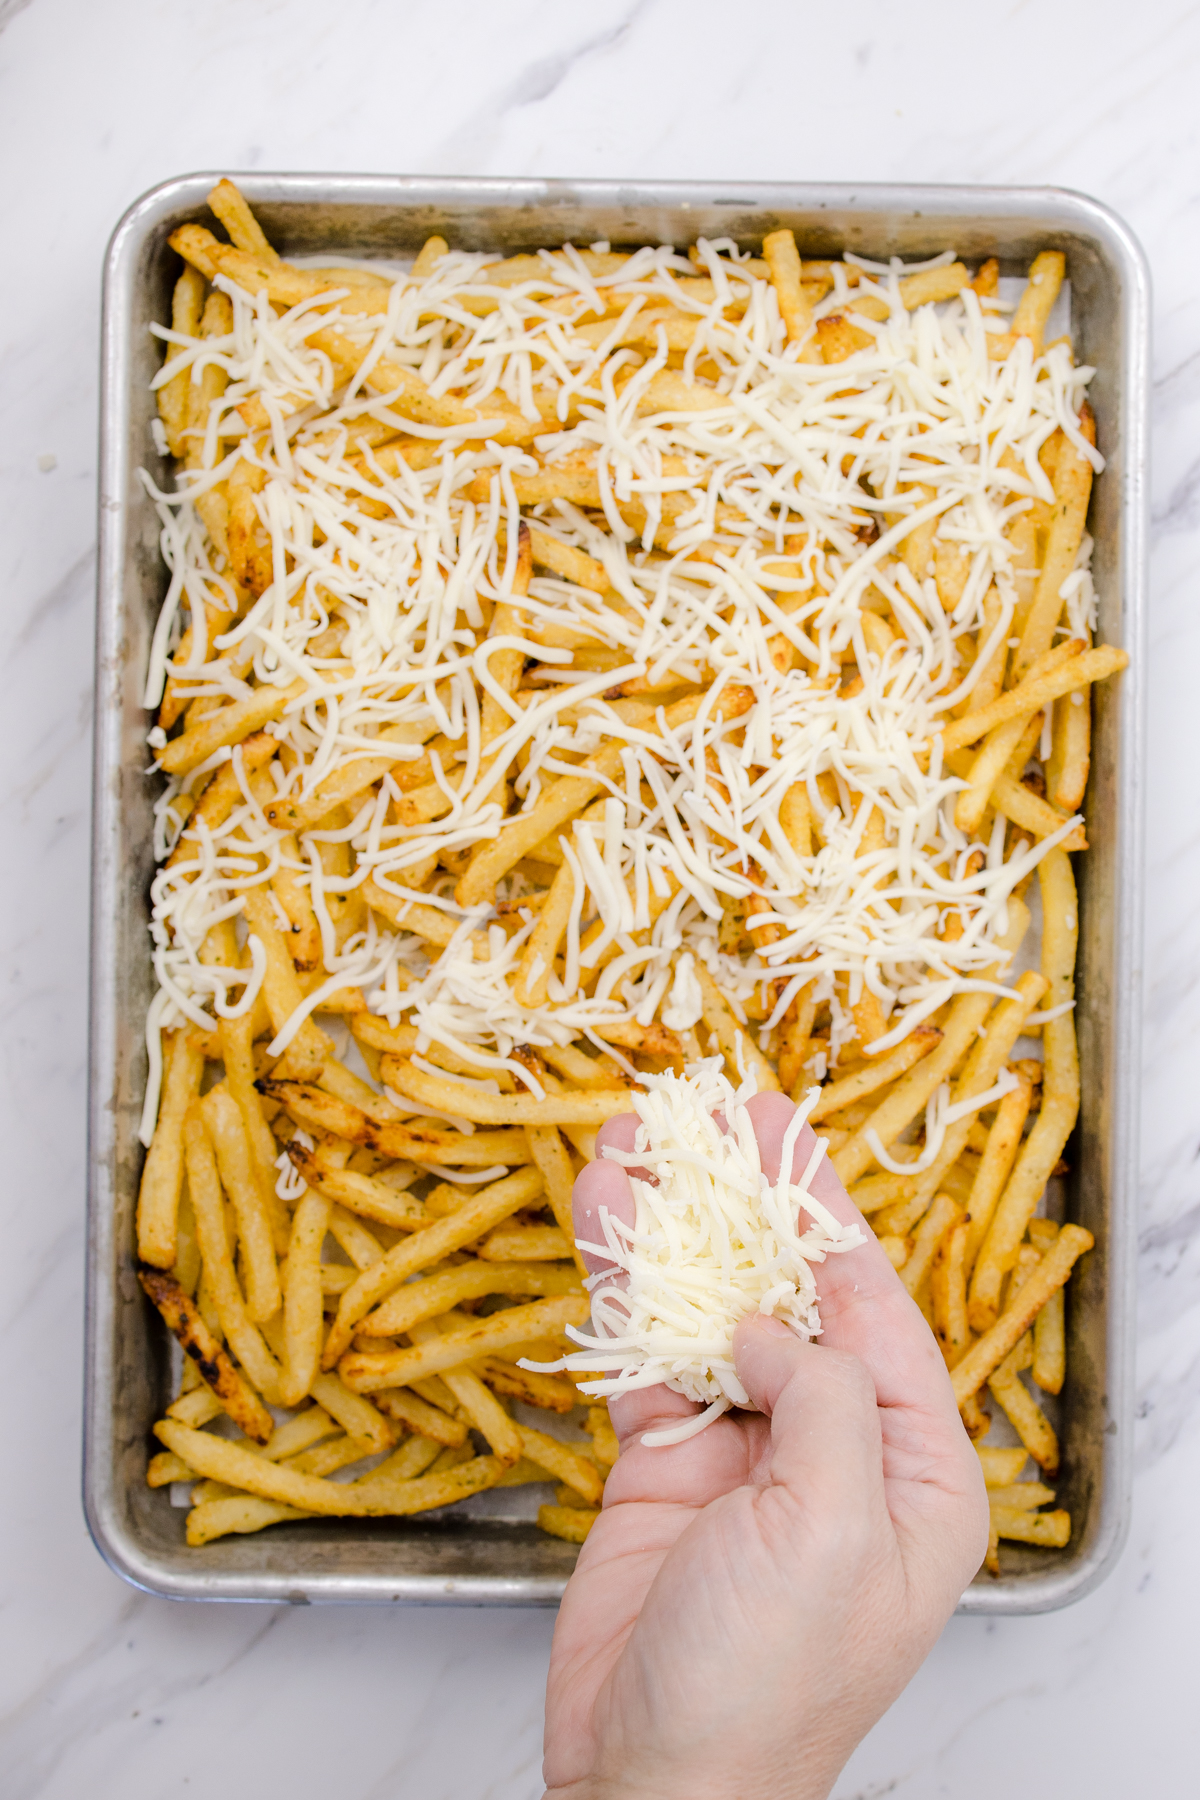 Top view of a baking tray with fries on it being topped with cheese by a hand. 